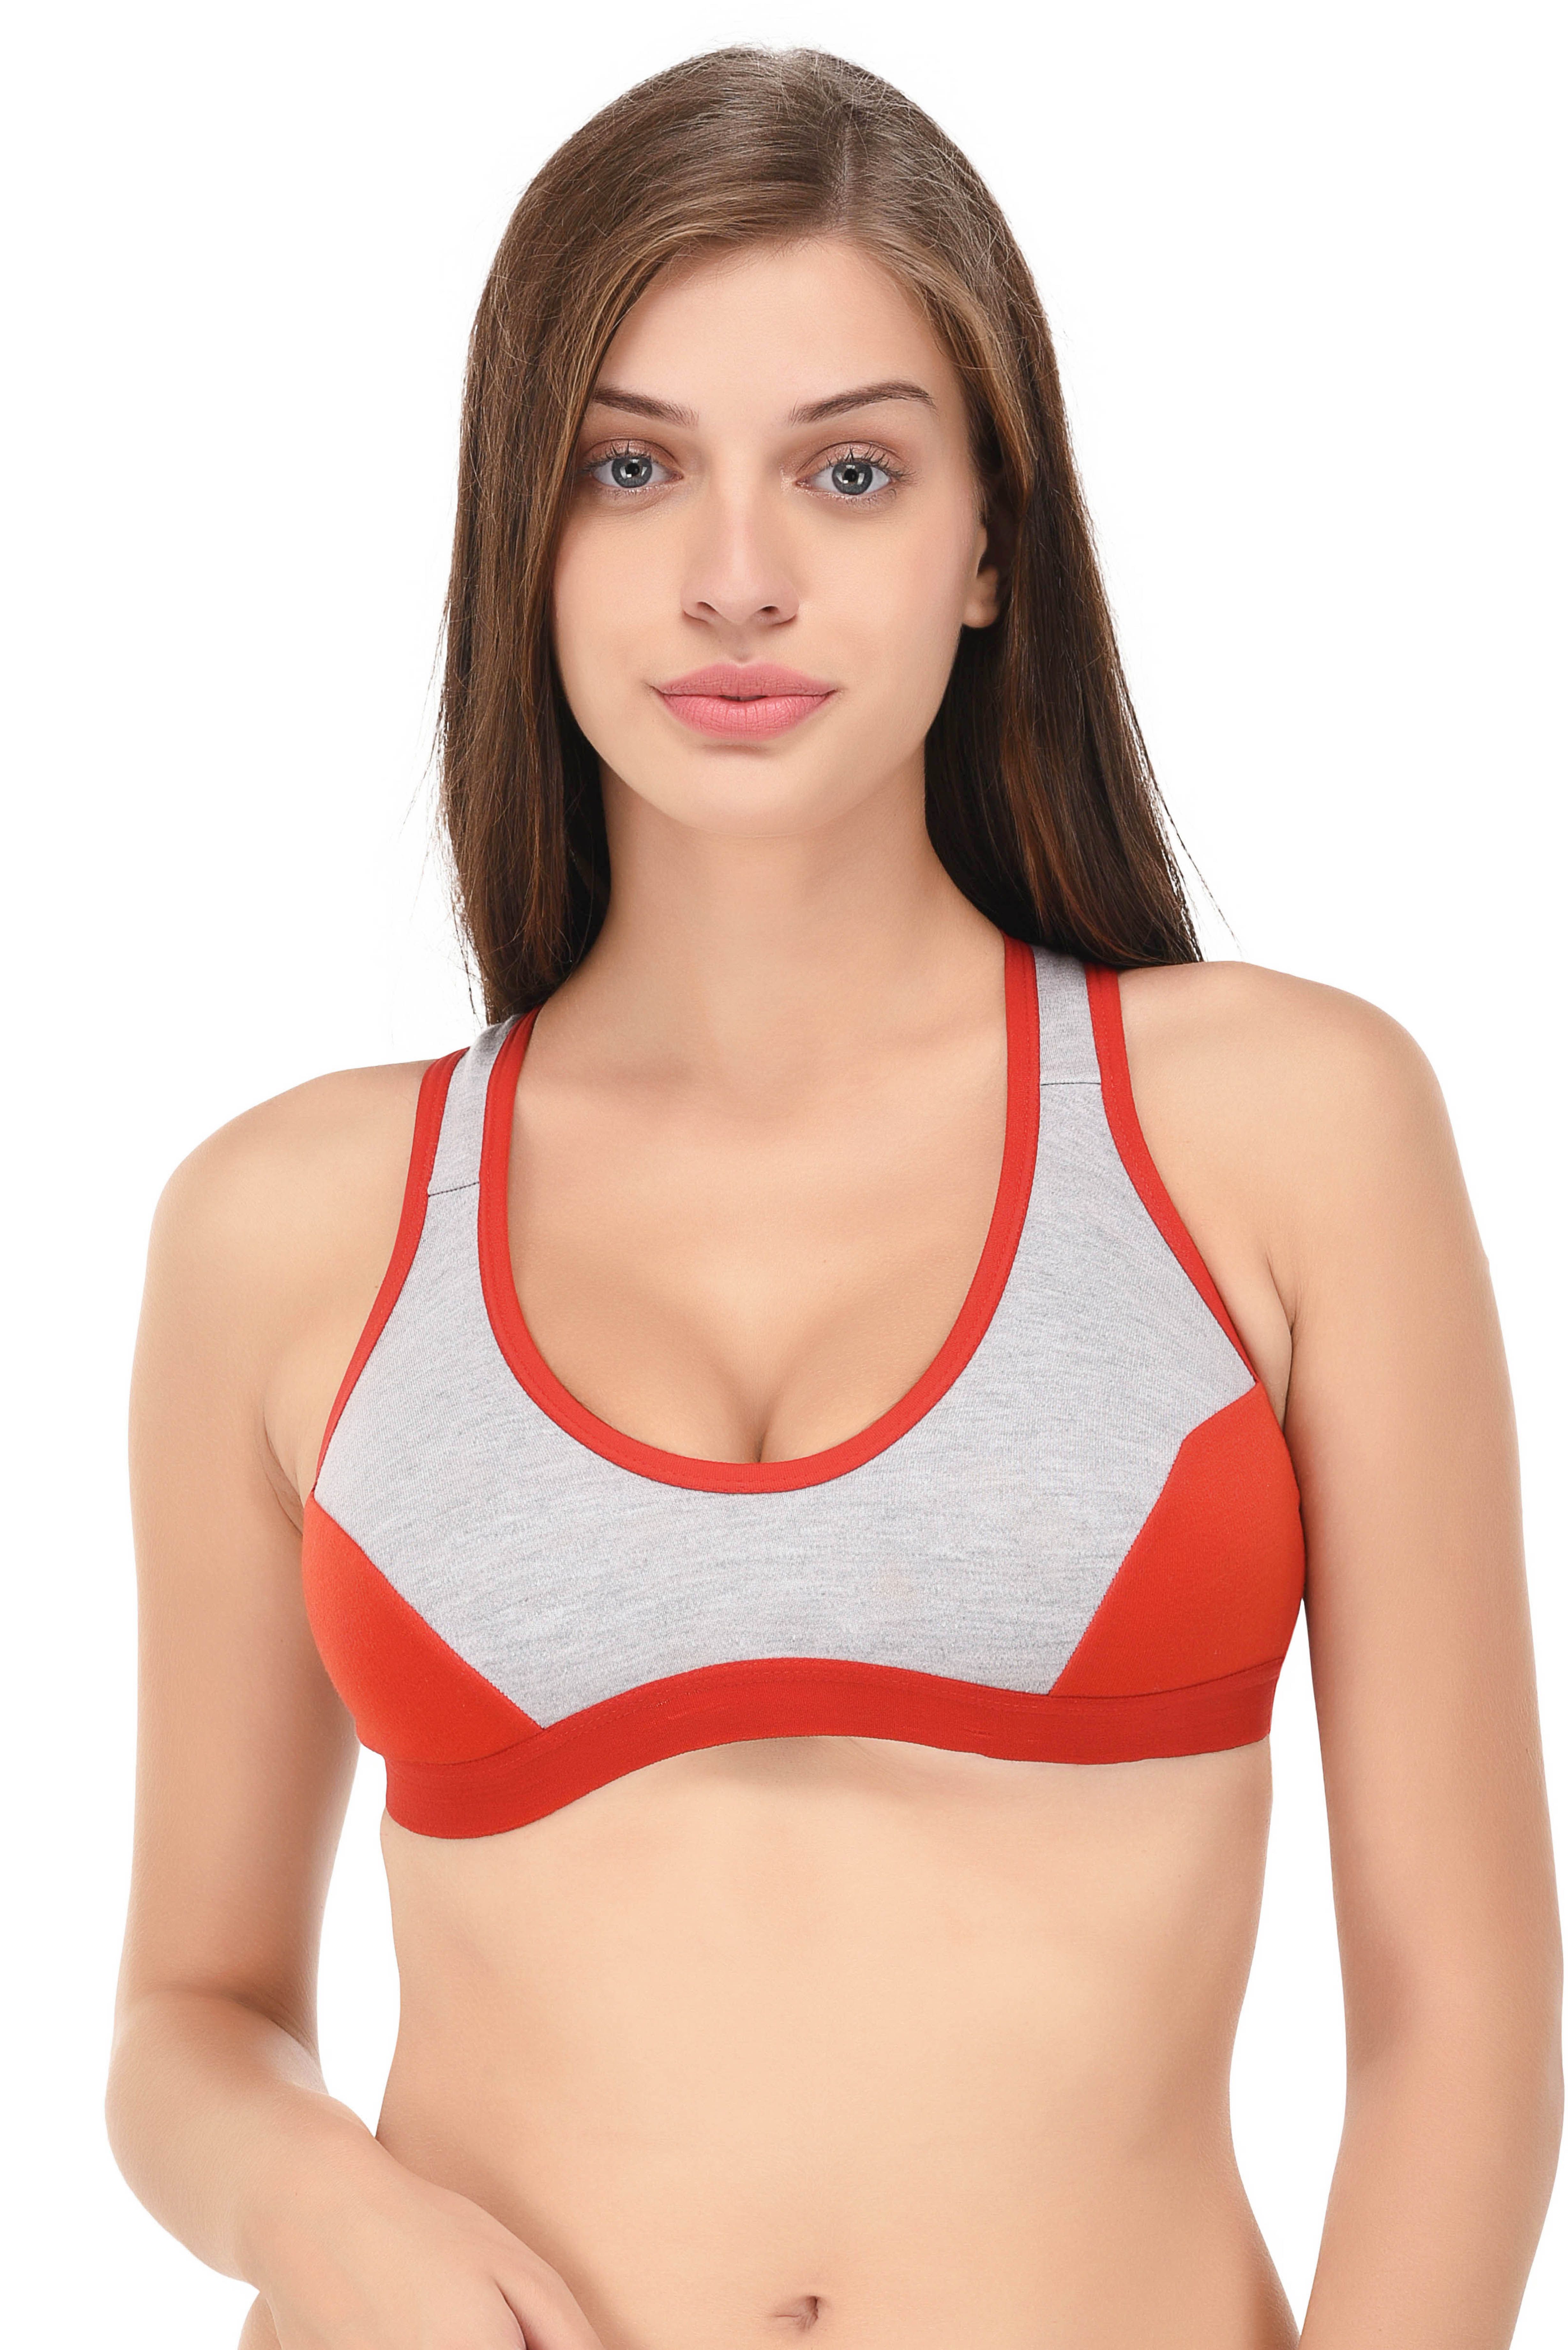 Buy Lizaray Cotton Sports Bra Red Online At Best Prices In India